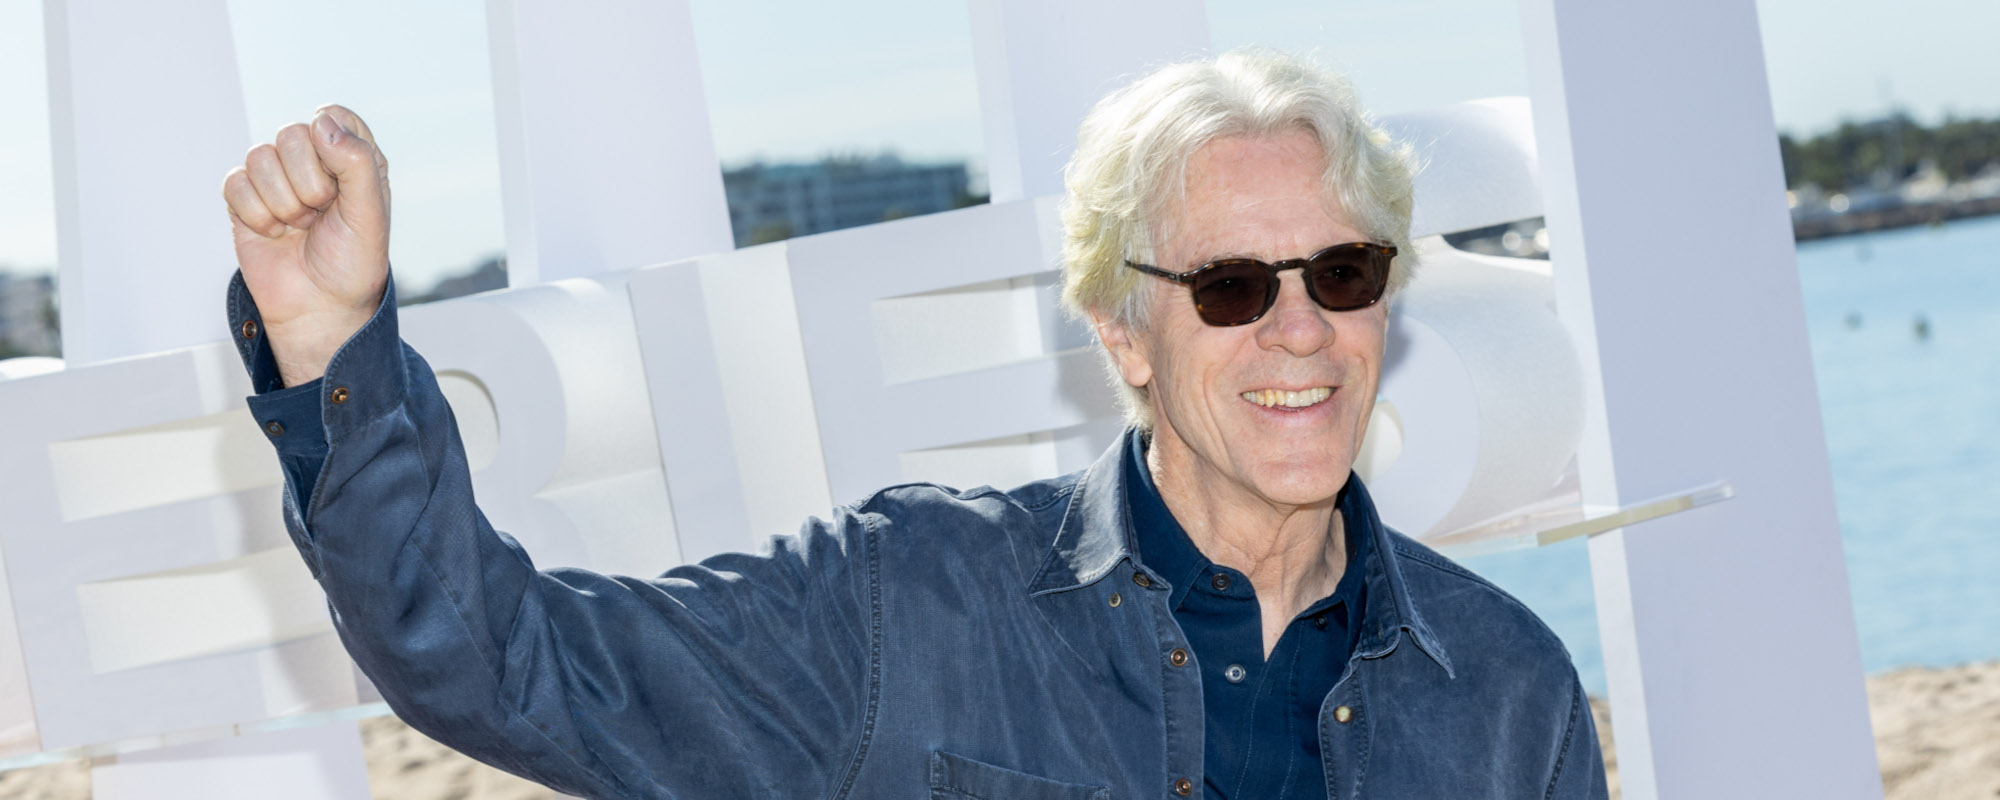 Stewart Copeland Reimagines The Police Classic, “Message in a Bottle; “Announces New Album